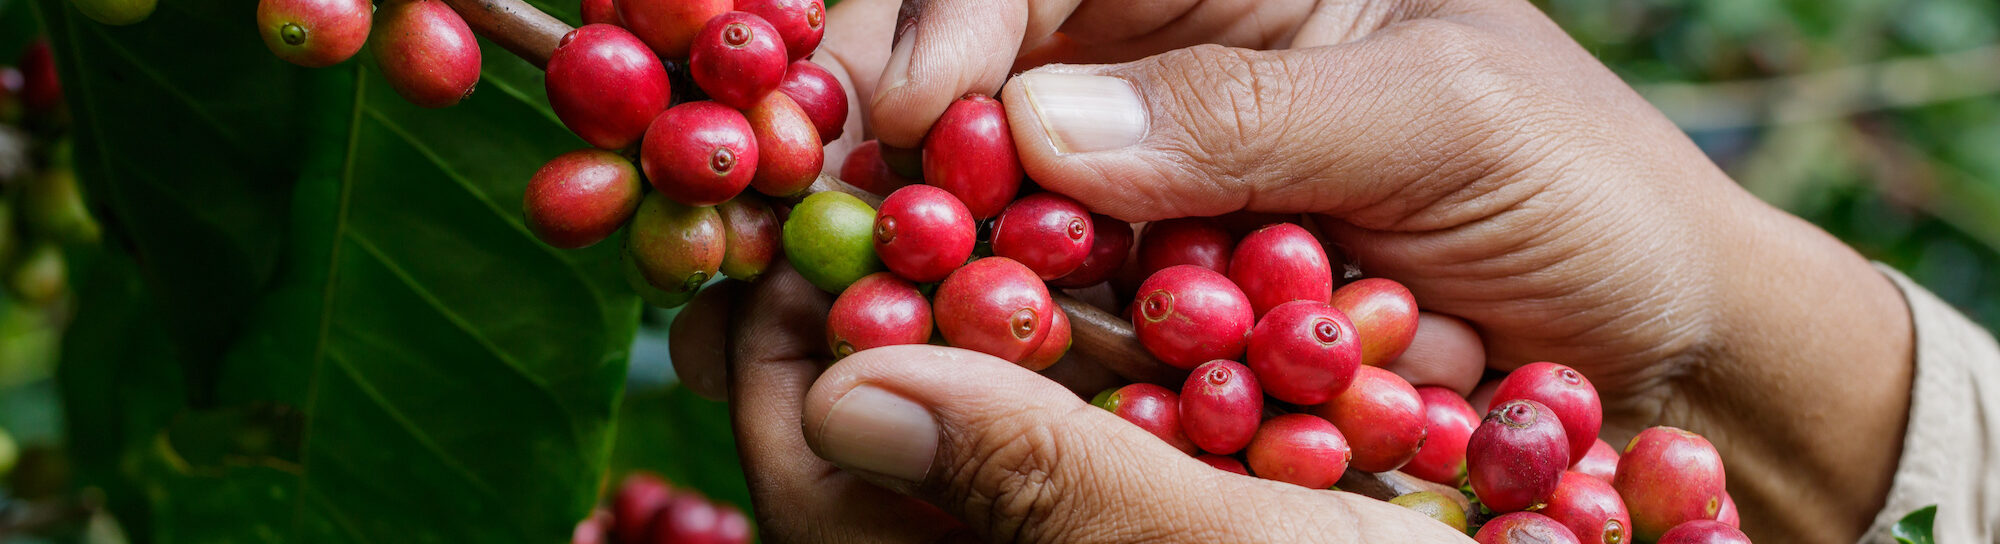 Climate change threatens the future of coffee